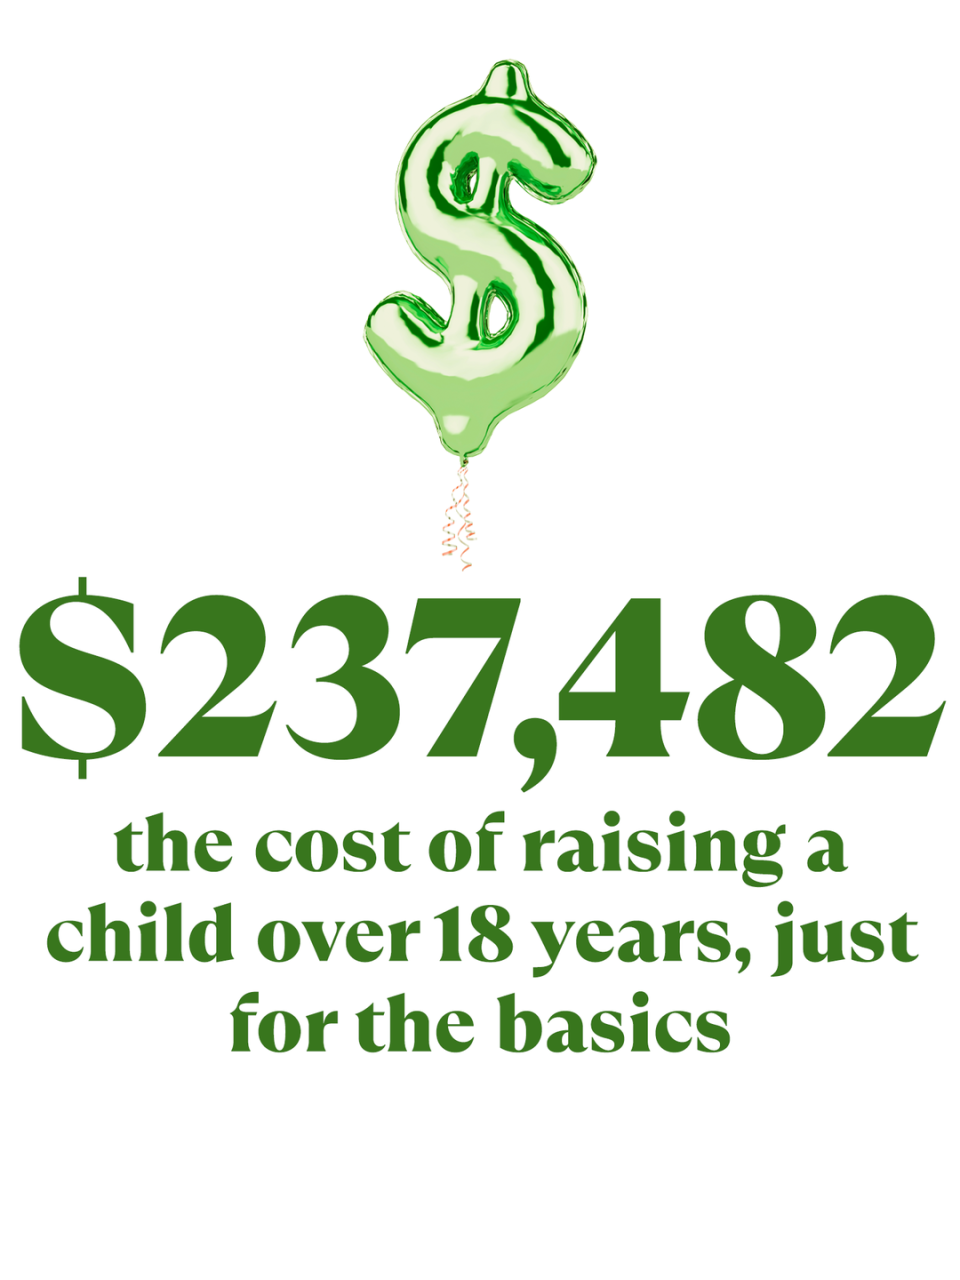 the cost of raising a child over 18 years is 237 482 just for the basic necessities